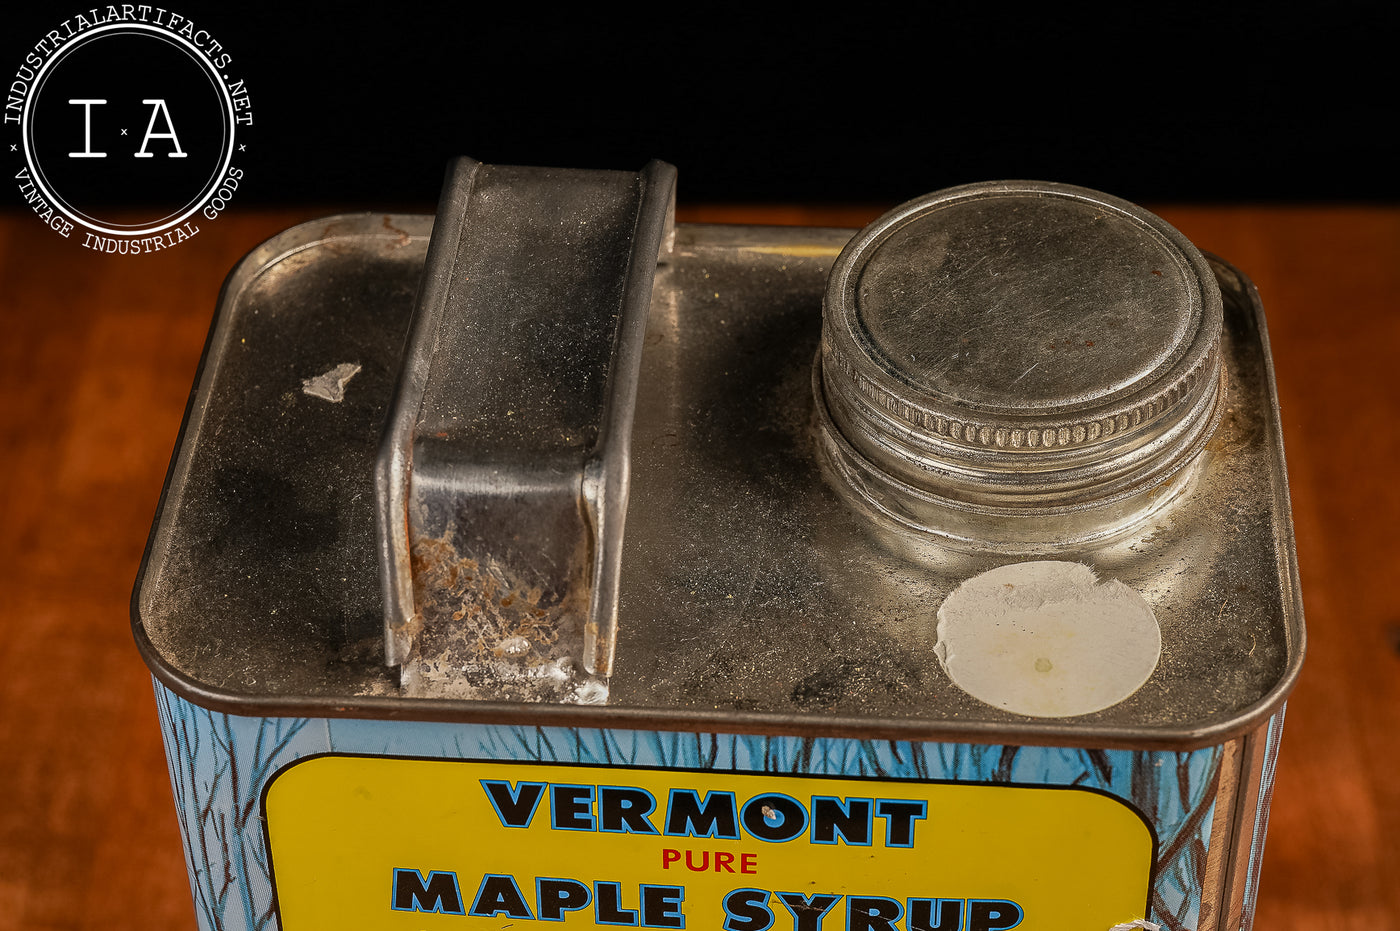 Vintage State of Vermont 66 oz. Maple Syrup Can